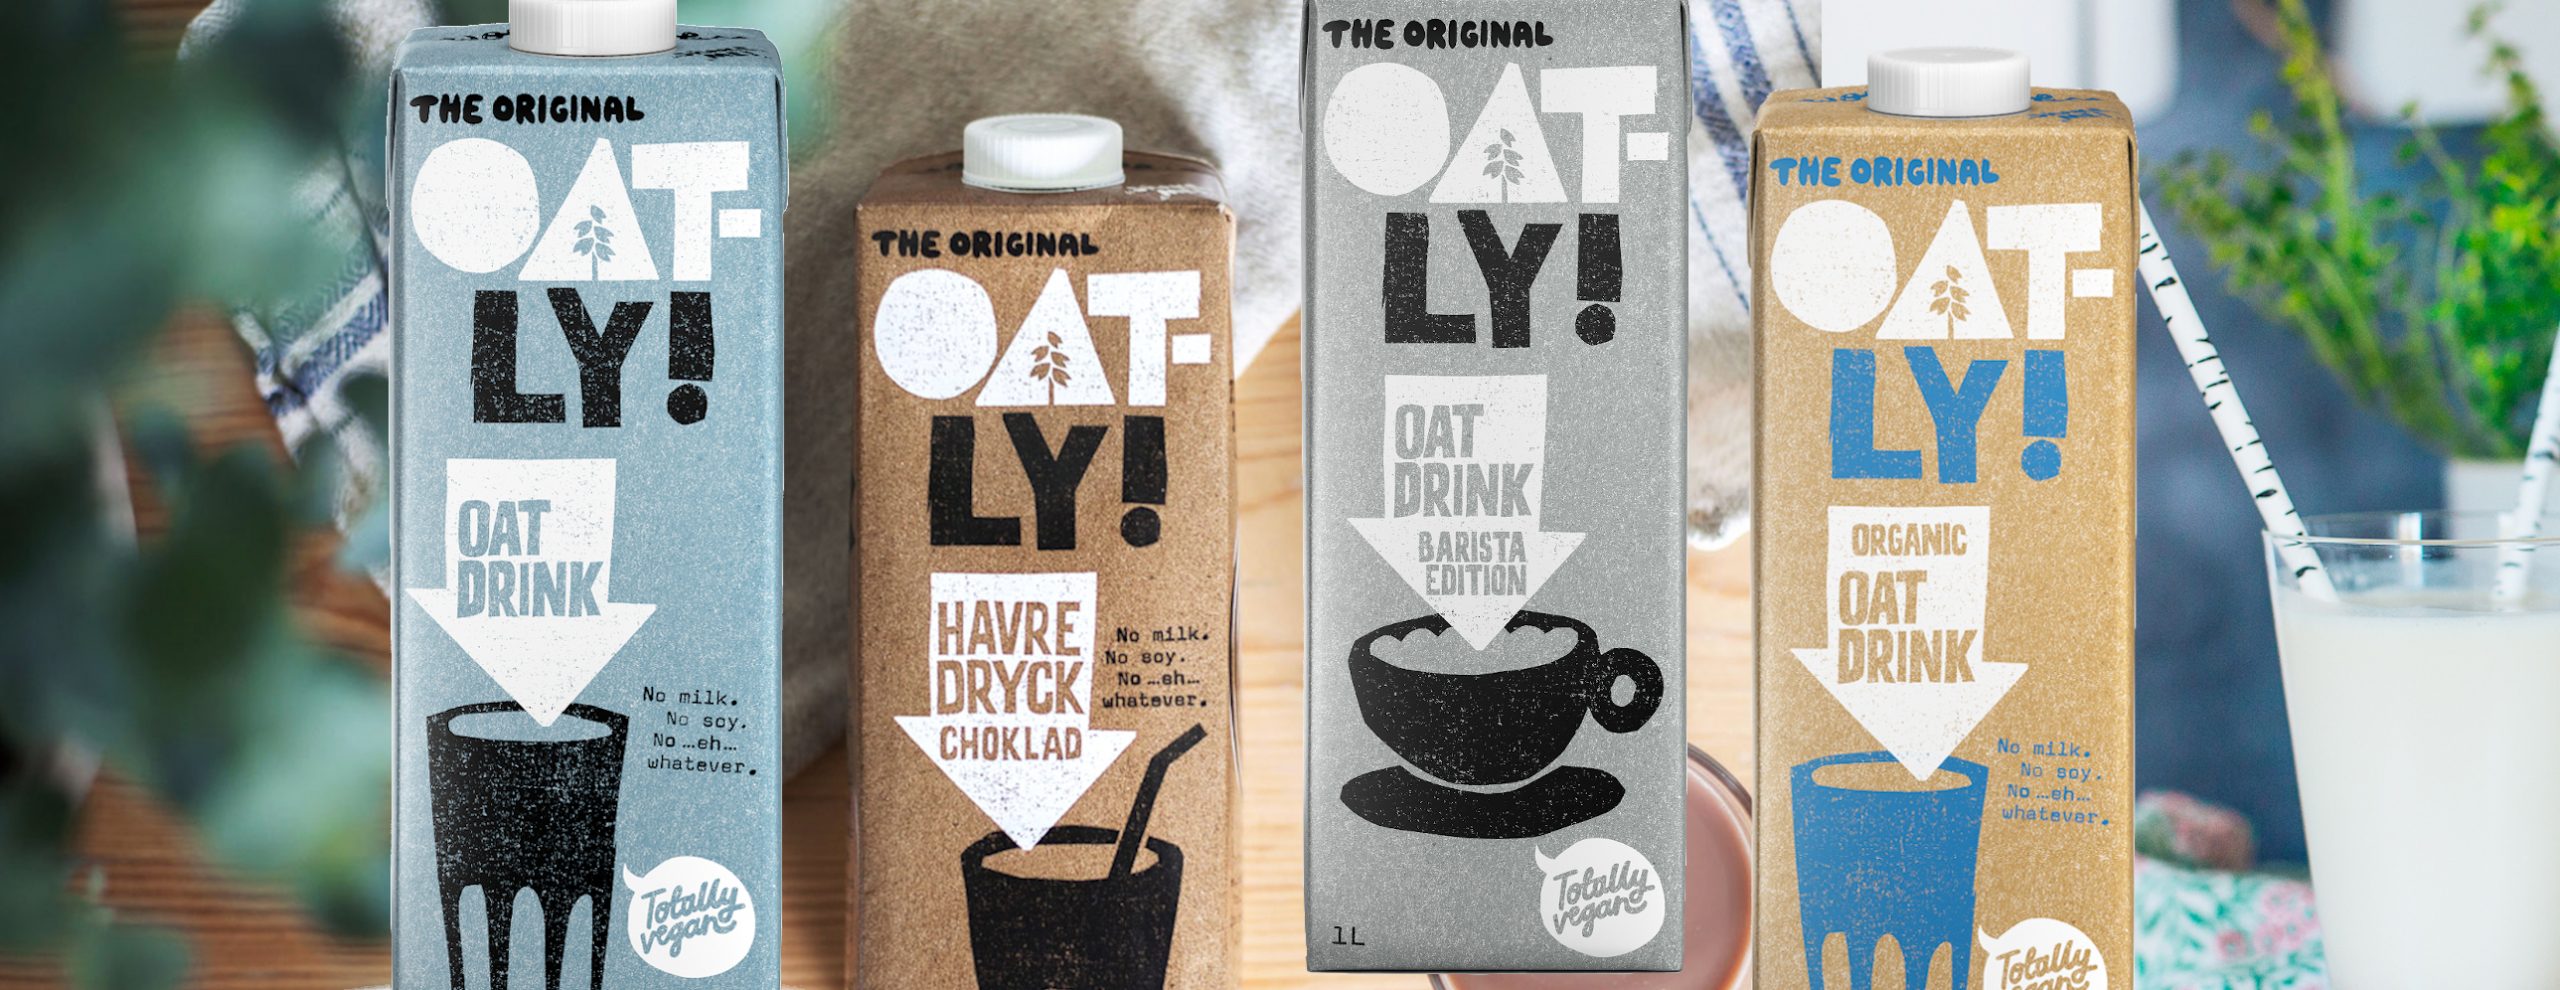 Oatly Oat Milk Review: Should You Make The Switch To This Dairy-Free,  Plant-Based Range?